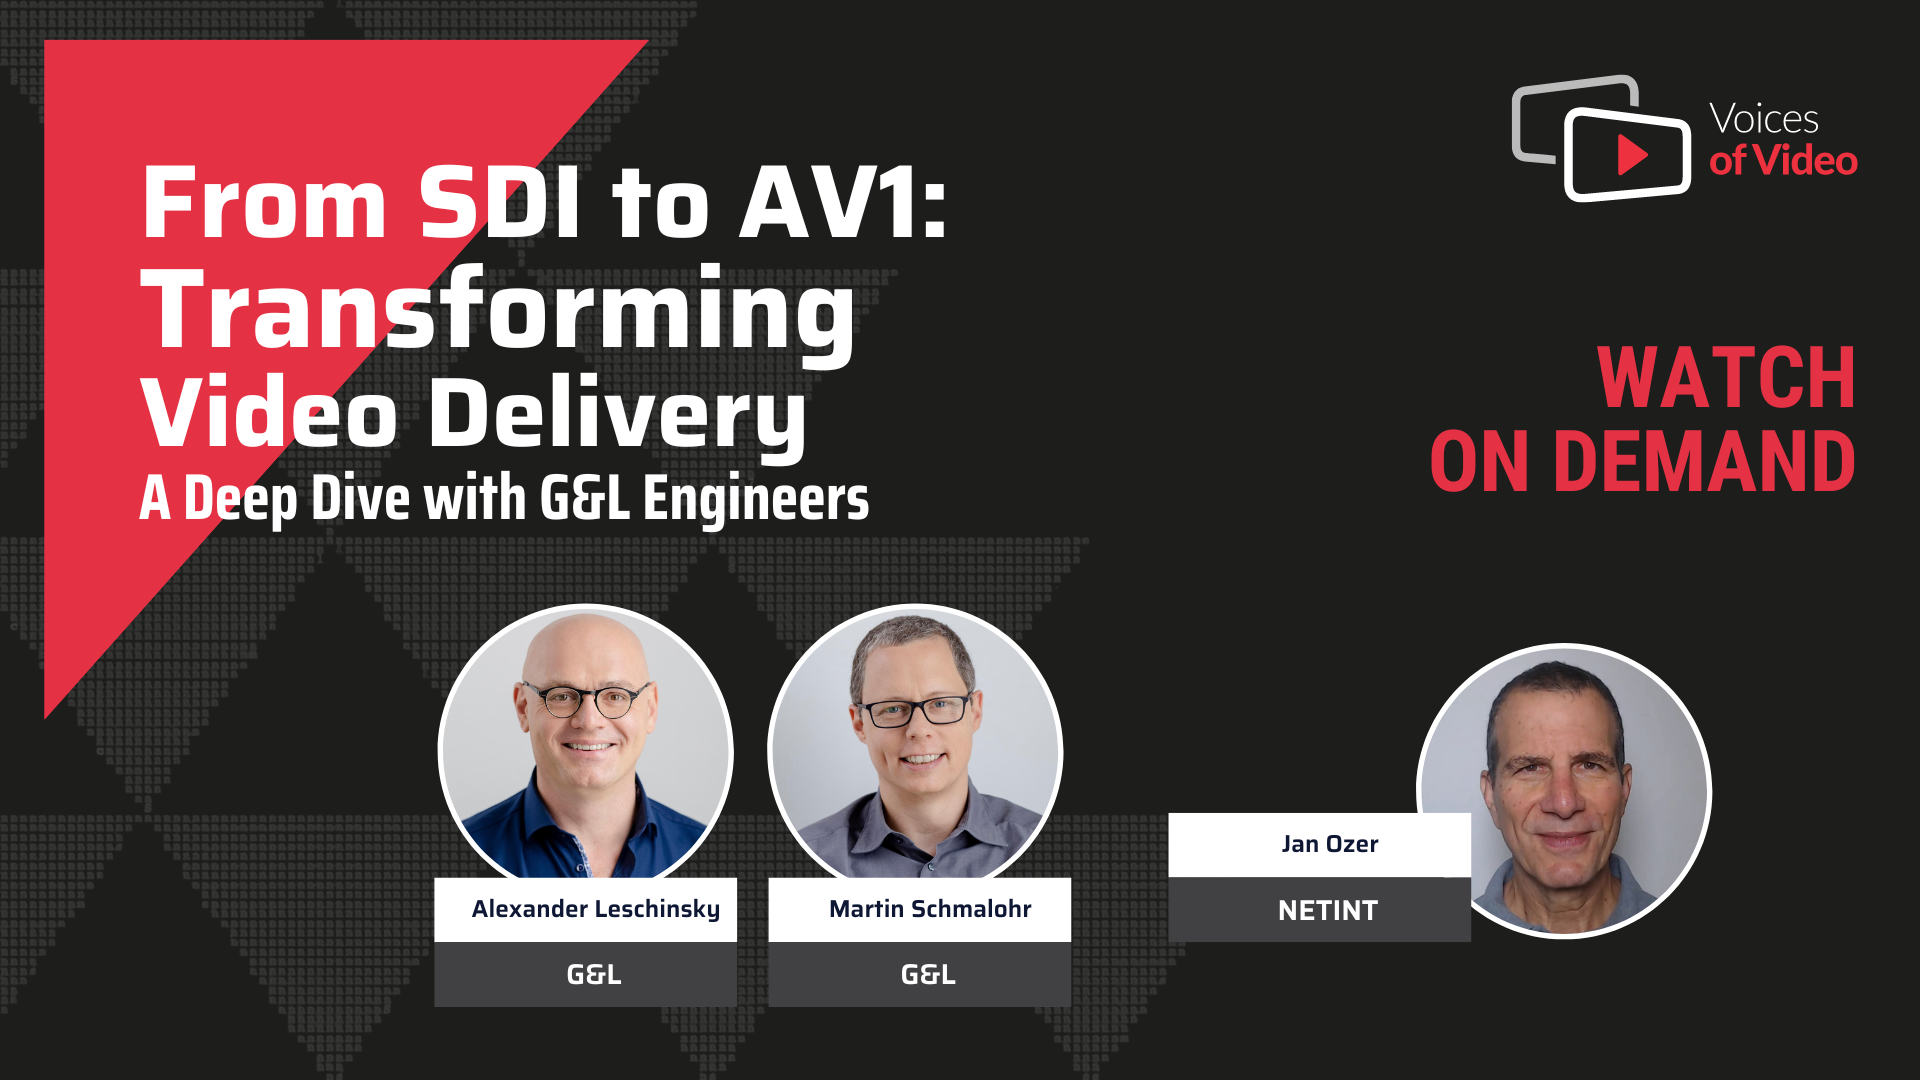 From SDI to AV1: Transforming Video Delivery | A Deep Dive with G&L Engineers - with Alexander Leschinsky and Martin Schmalohr